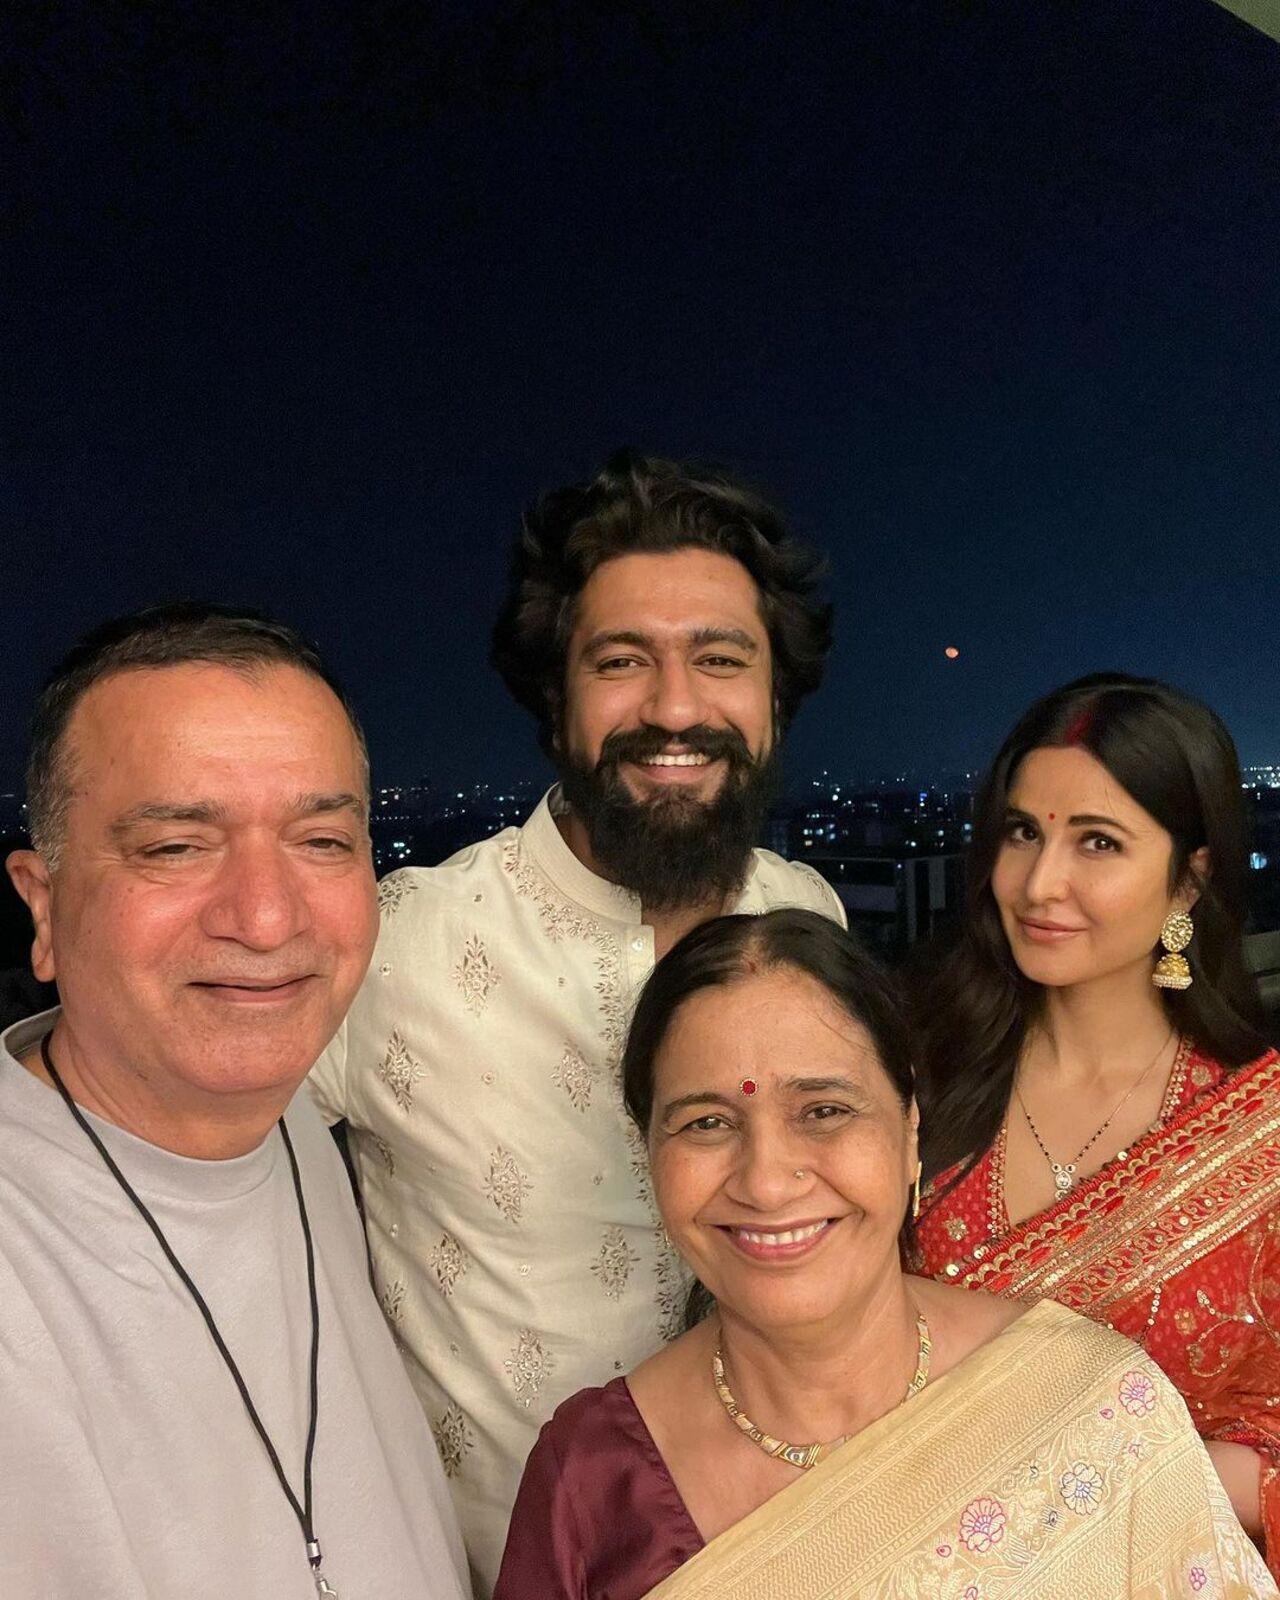 Vicky and Katrina pose with the former's parents as they all celebrate the festival at their Mumbai home